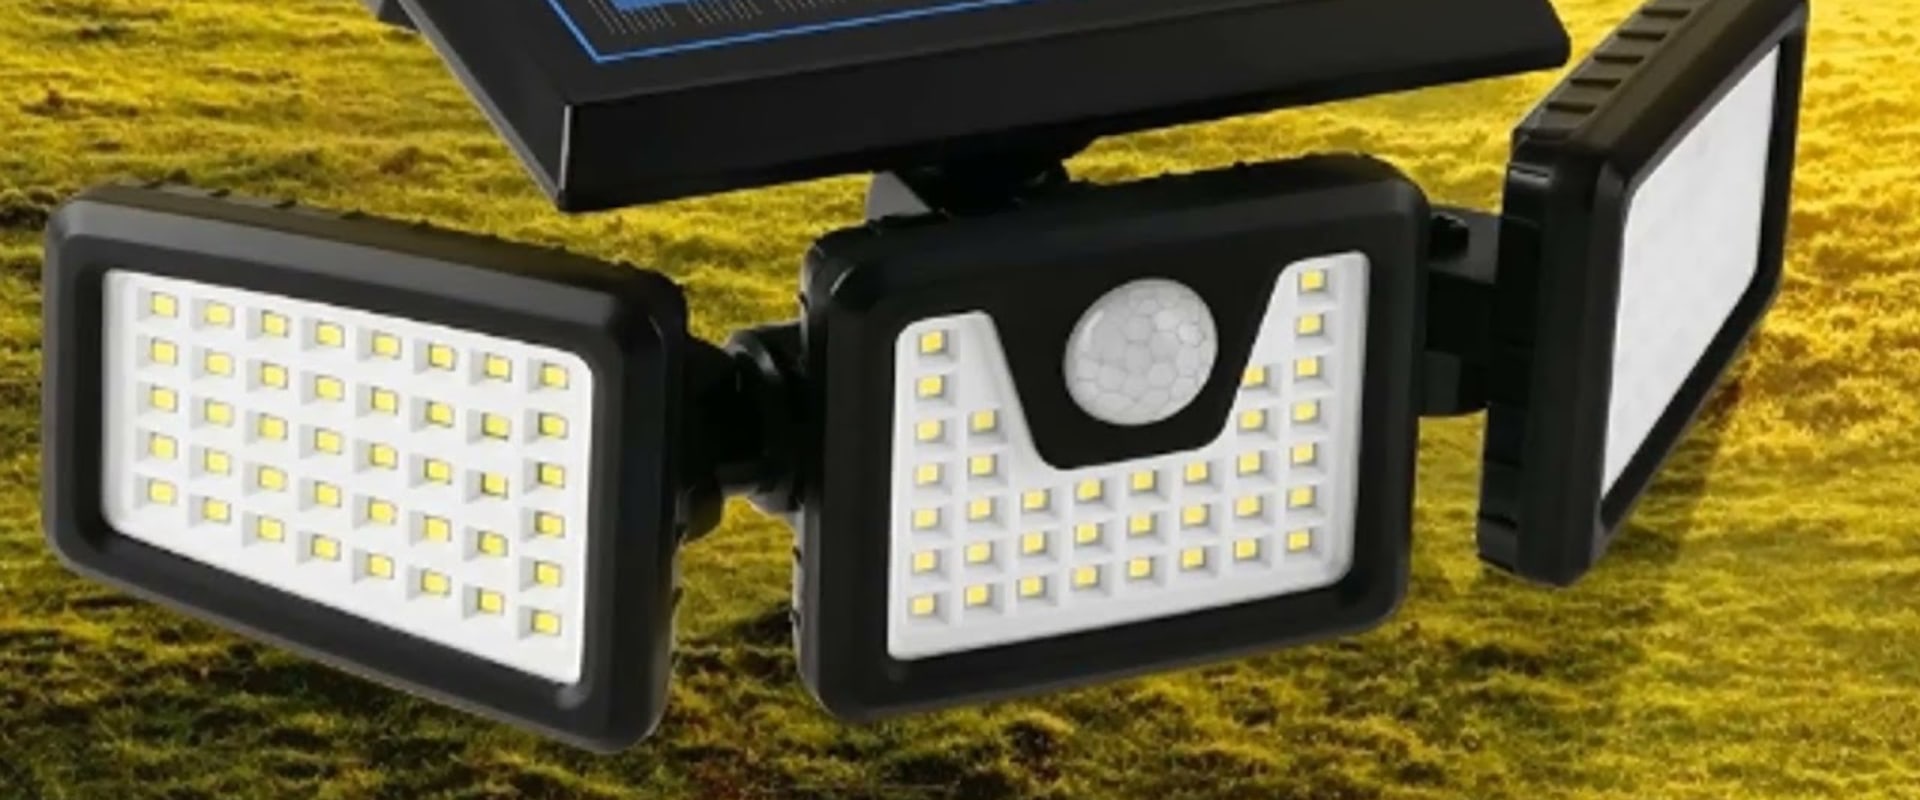 Best Solar Powered Security Lights Reviews